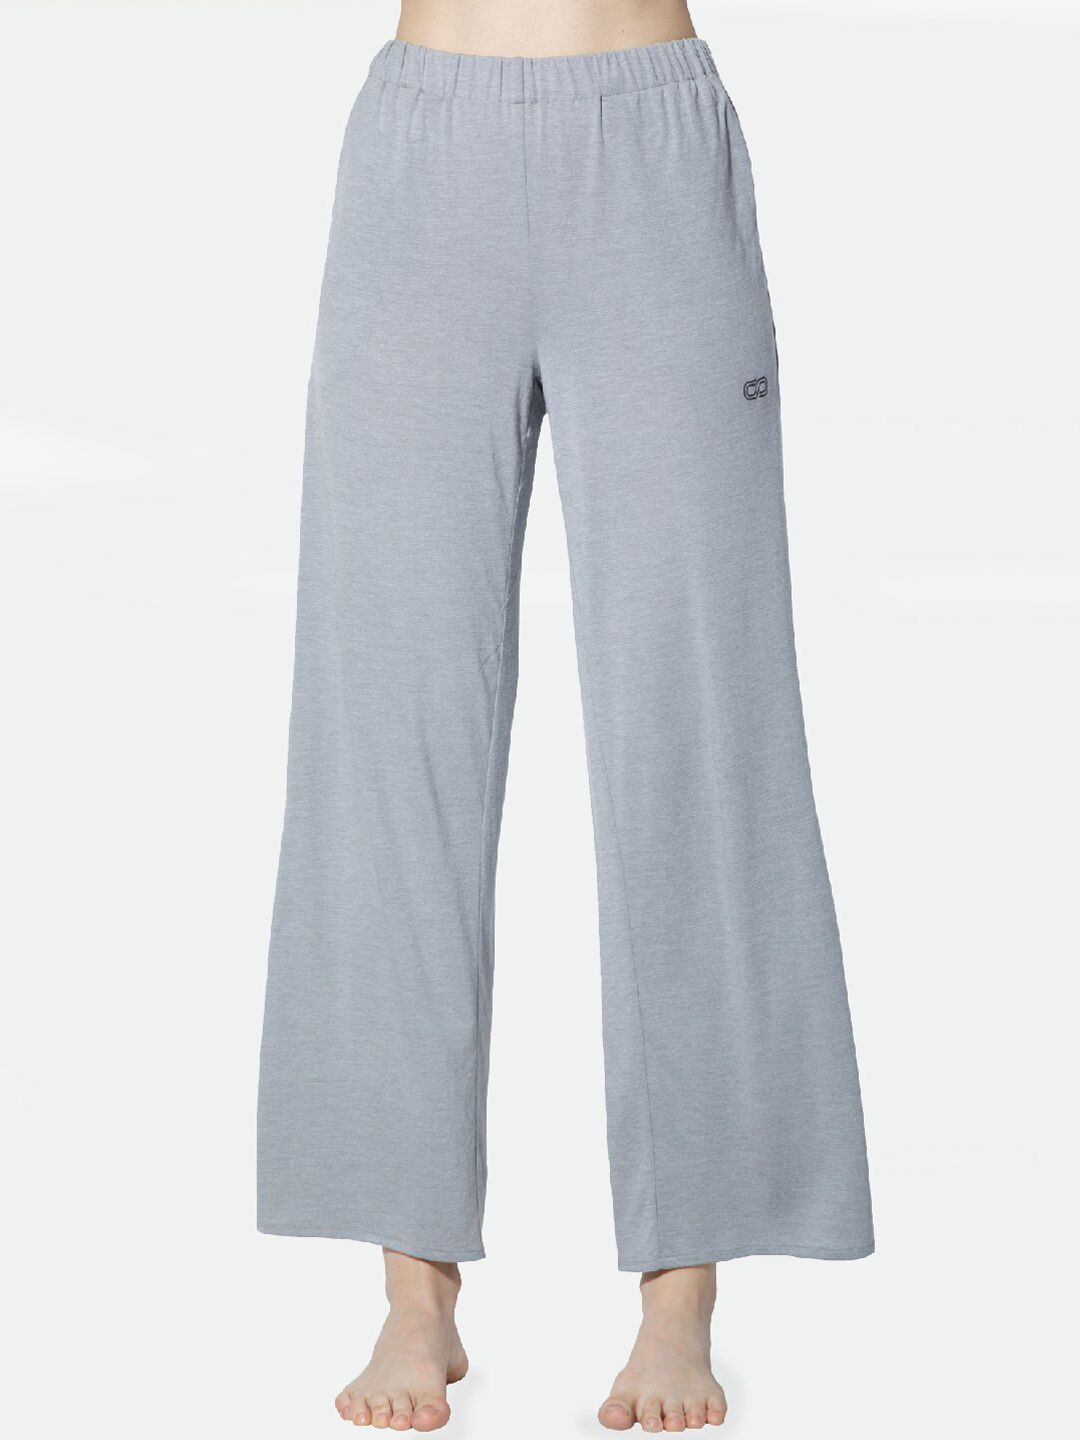 Silvertraq Grey Melange Straight Track Pants Price in India